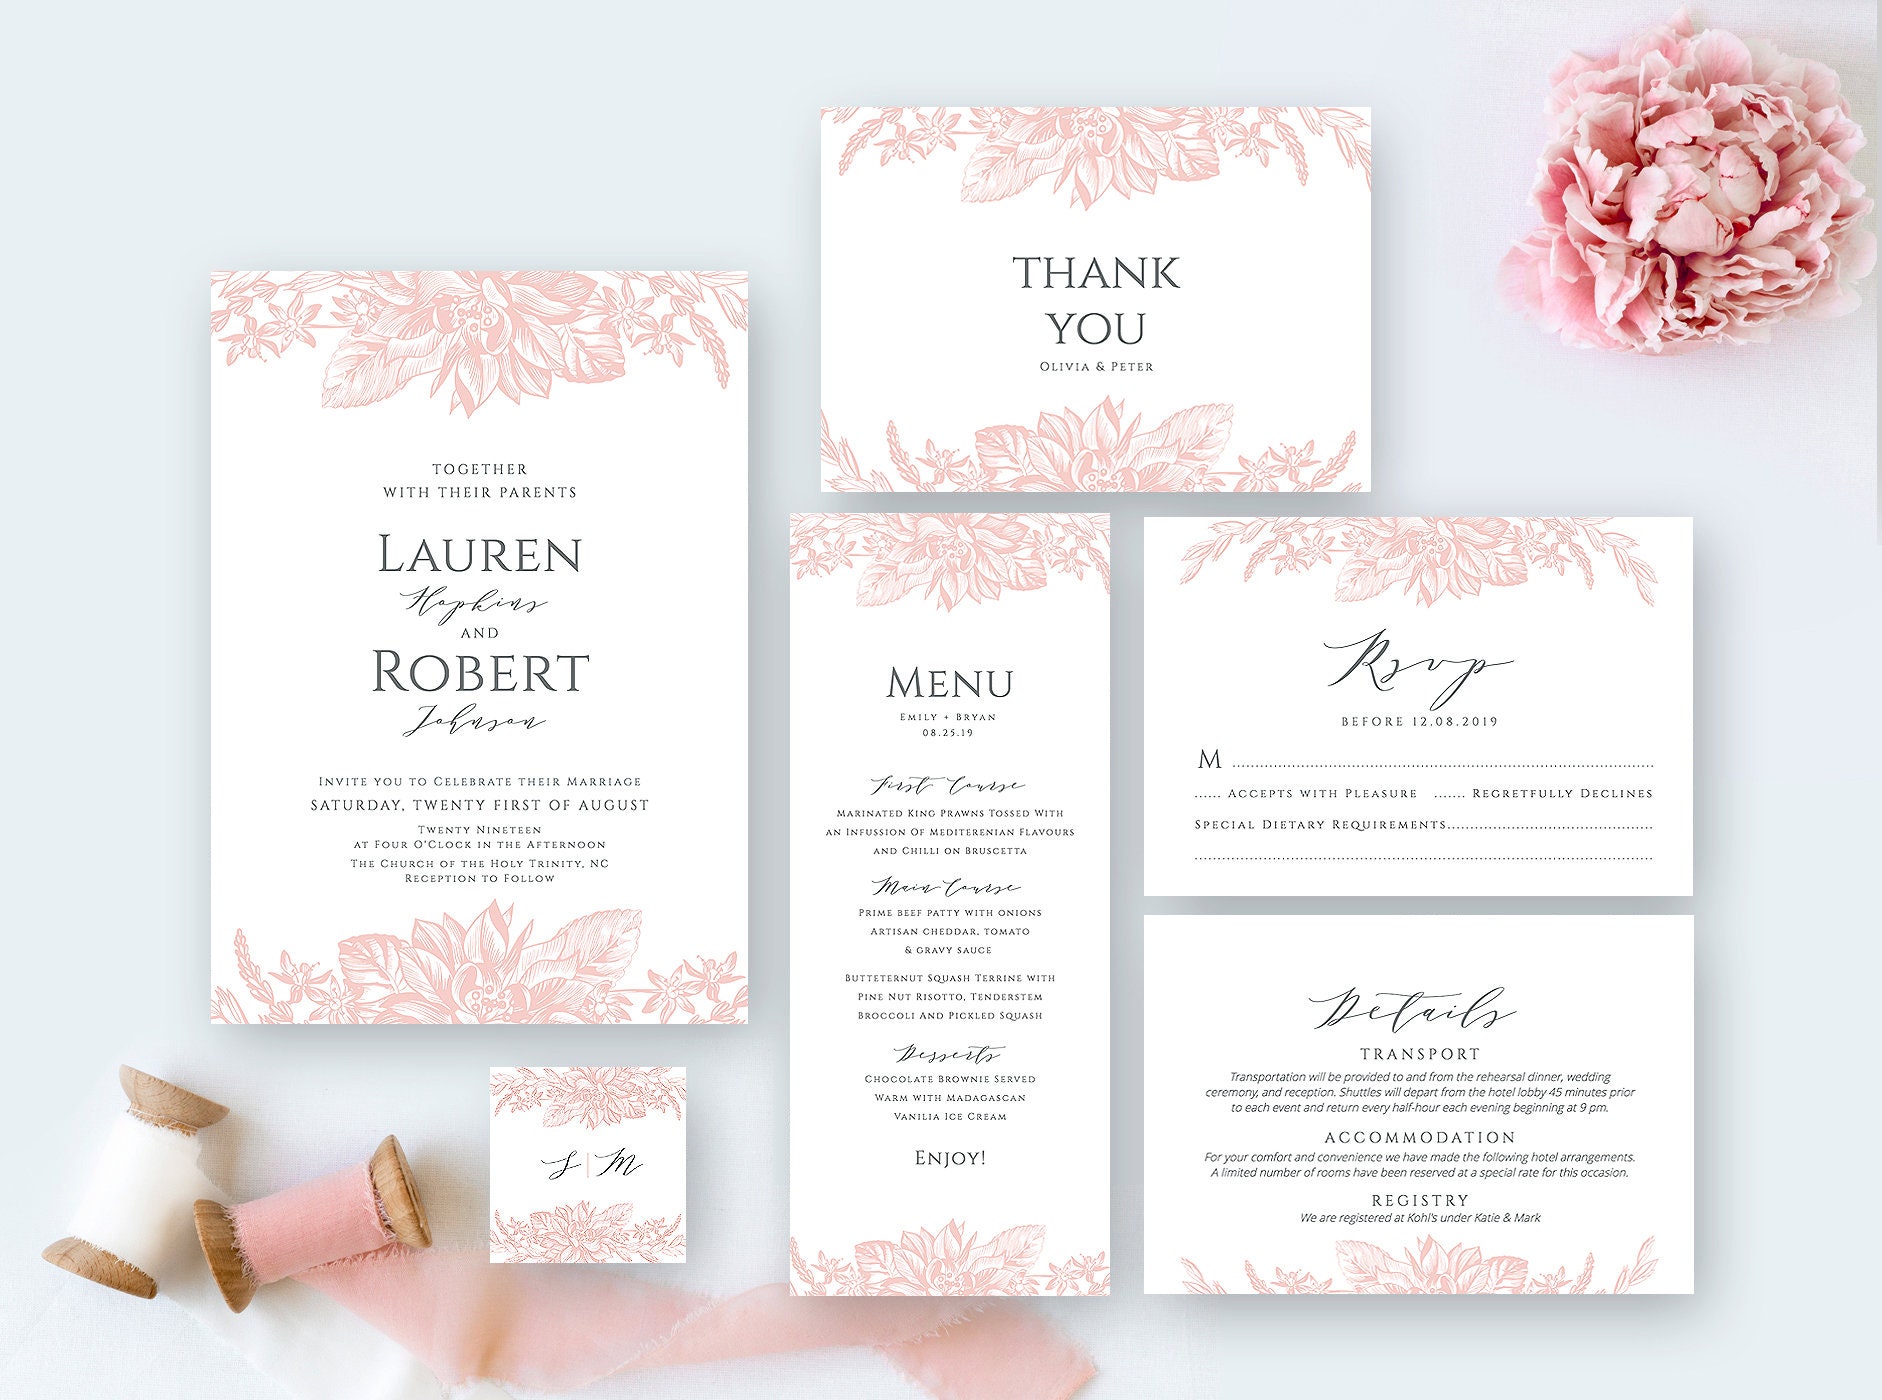 Wedding invitation suite decorated with delicate blush flower | Etsy